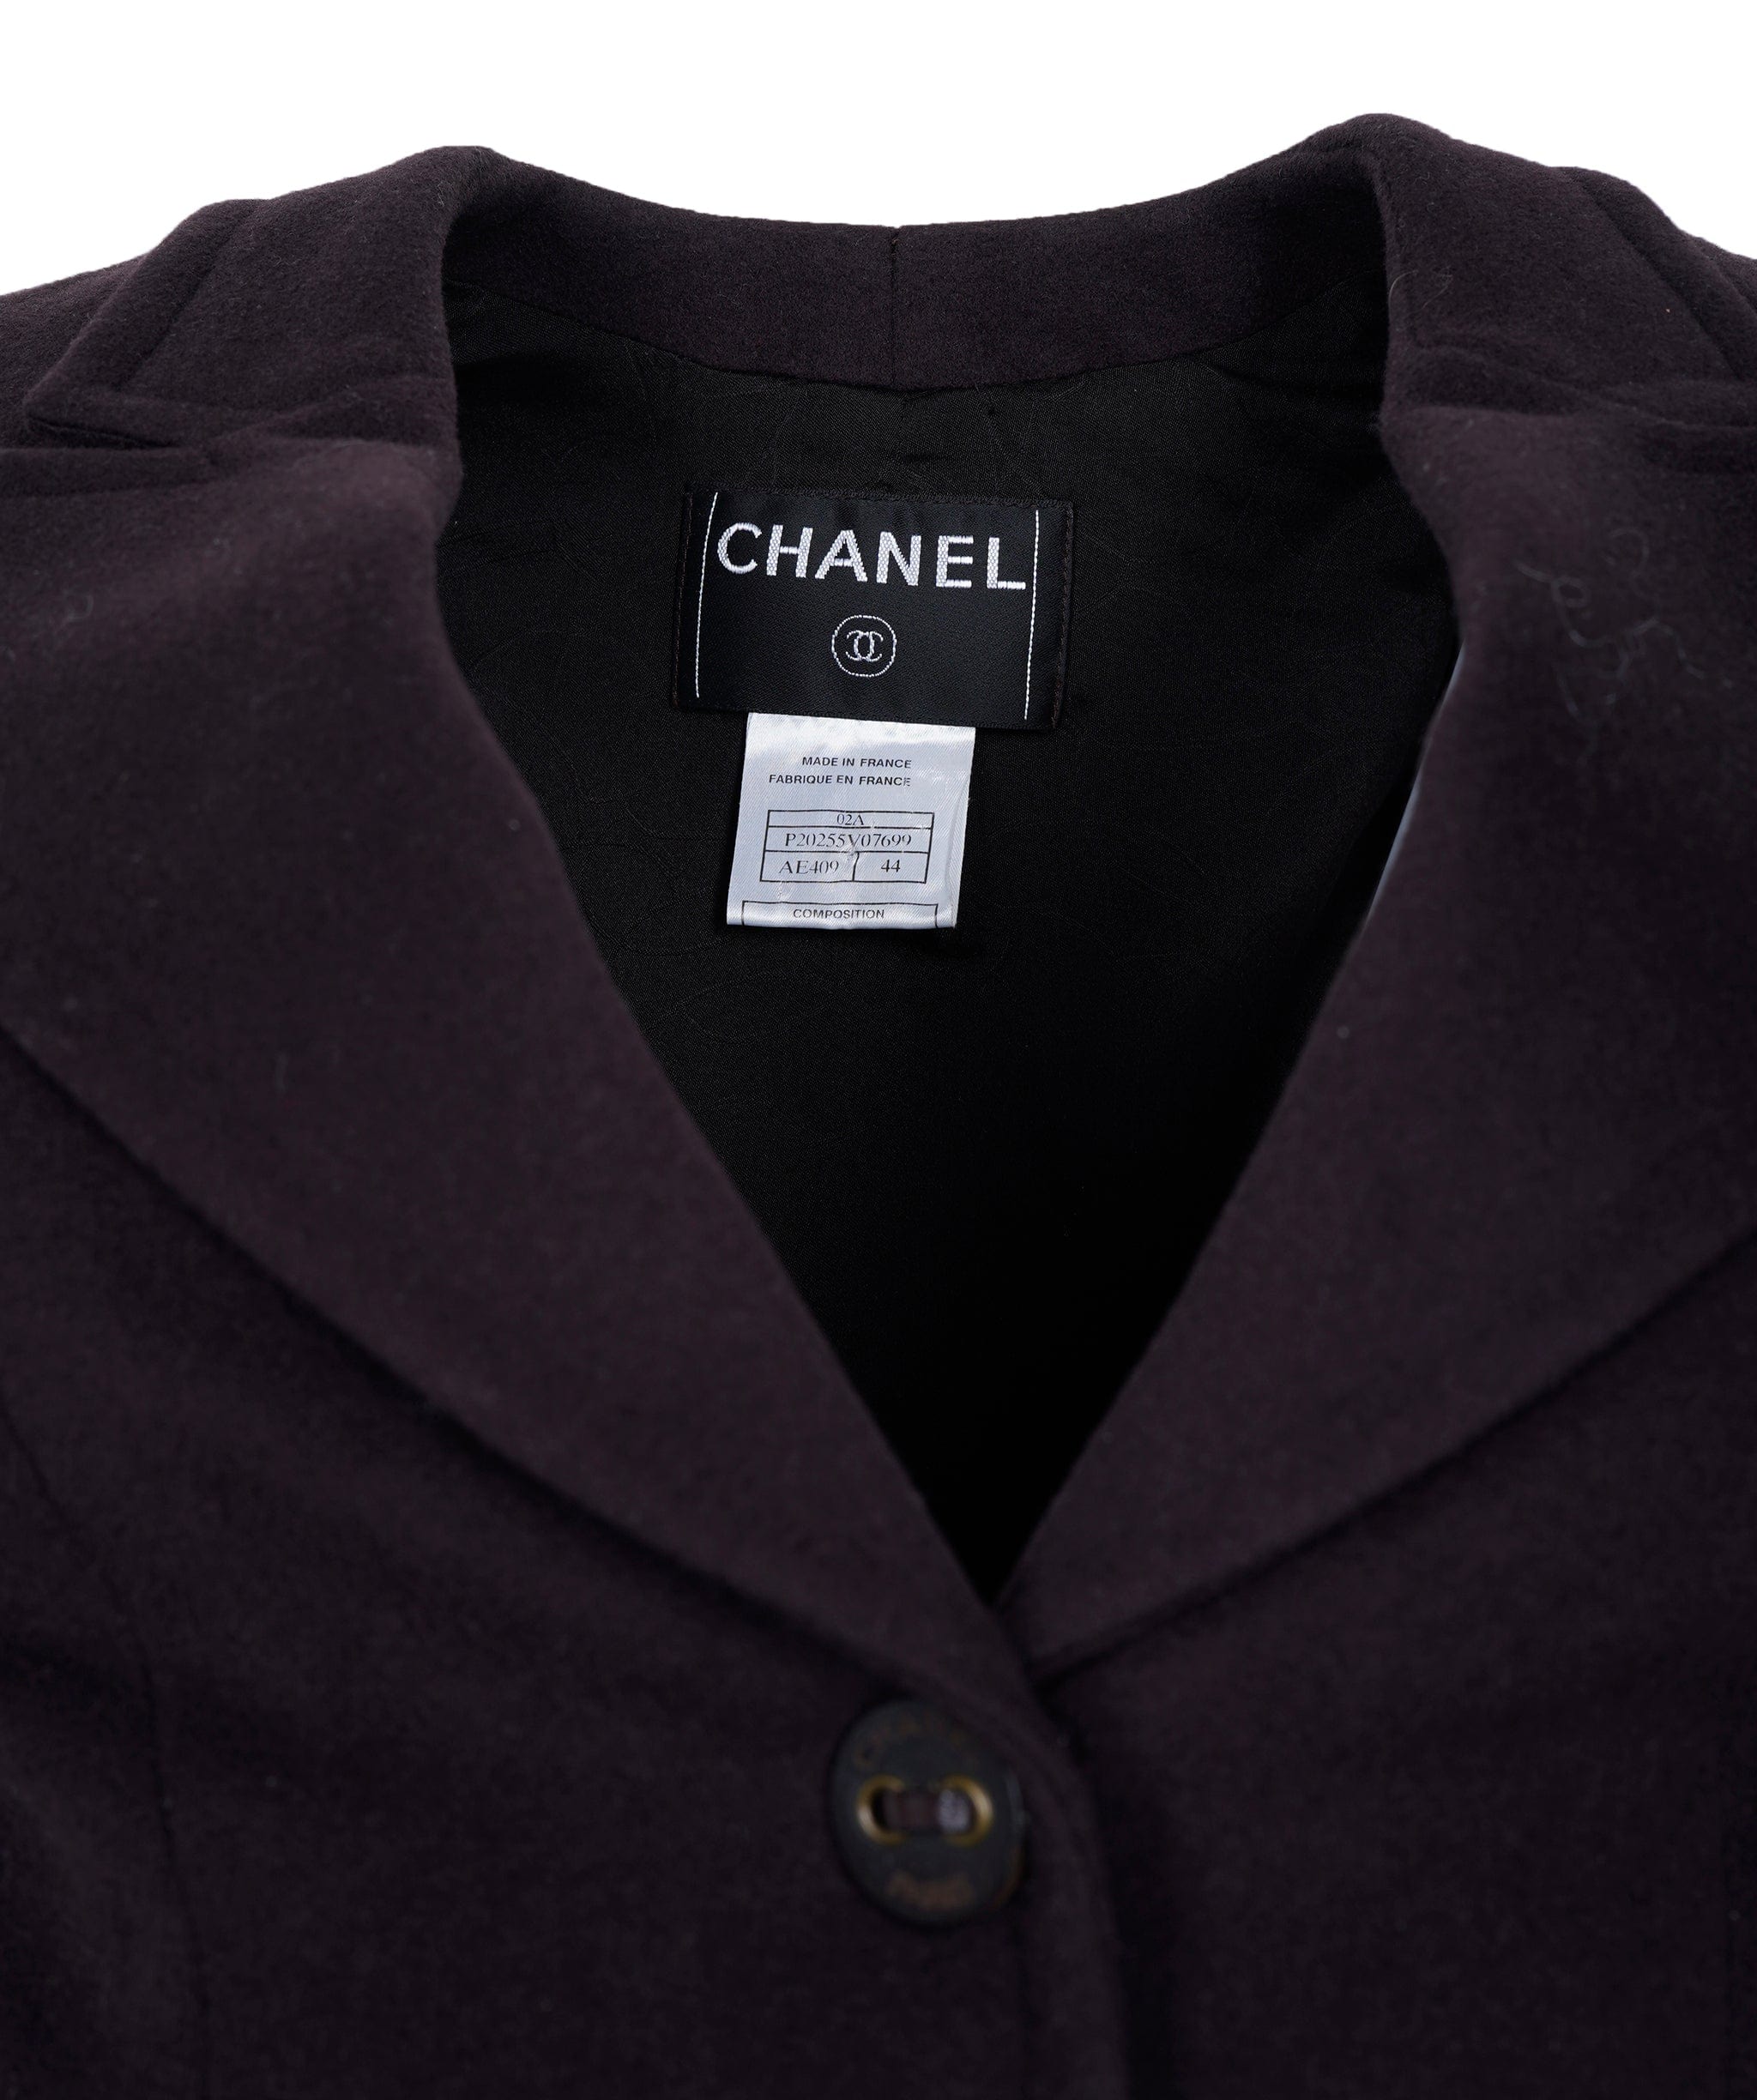 Chanel Chanel Brown Cashmere Jacket with Leather Buttons ASL9682